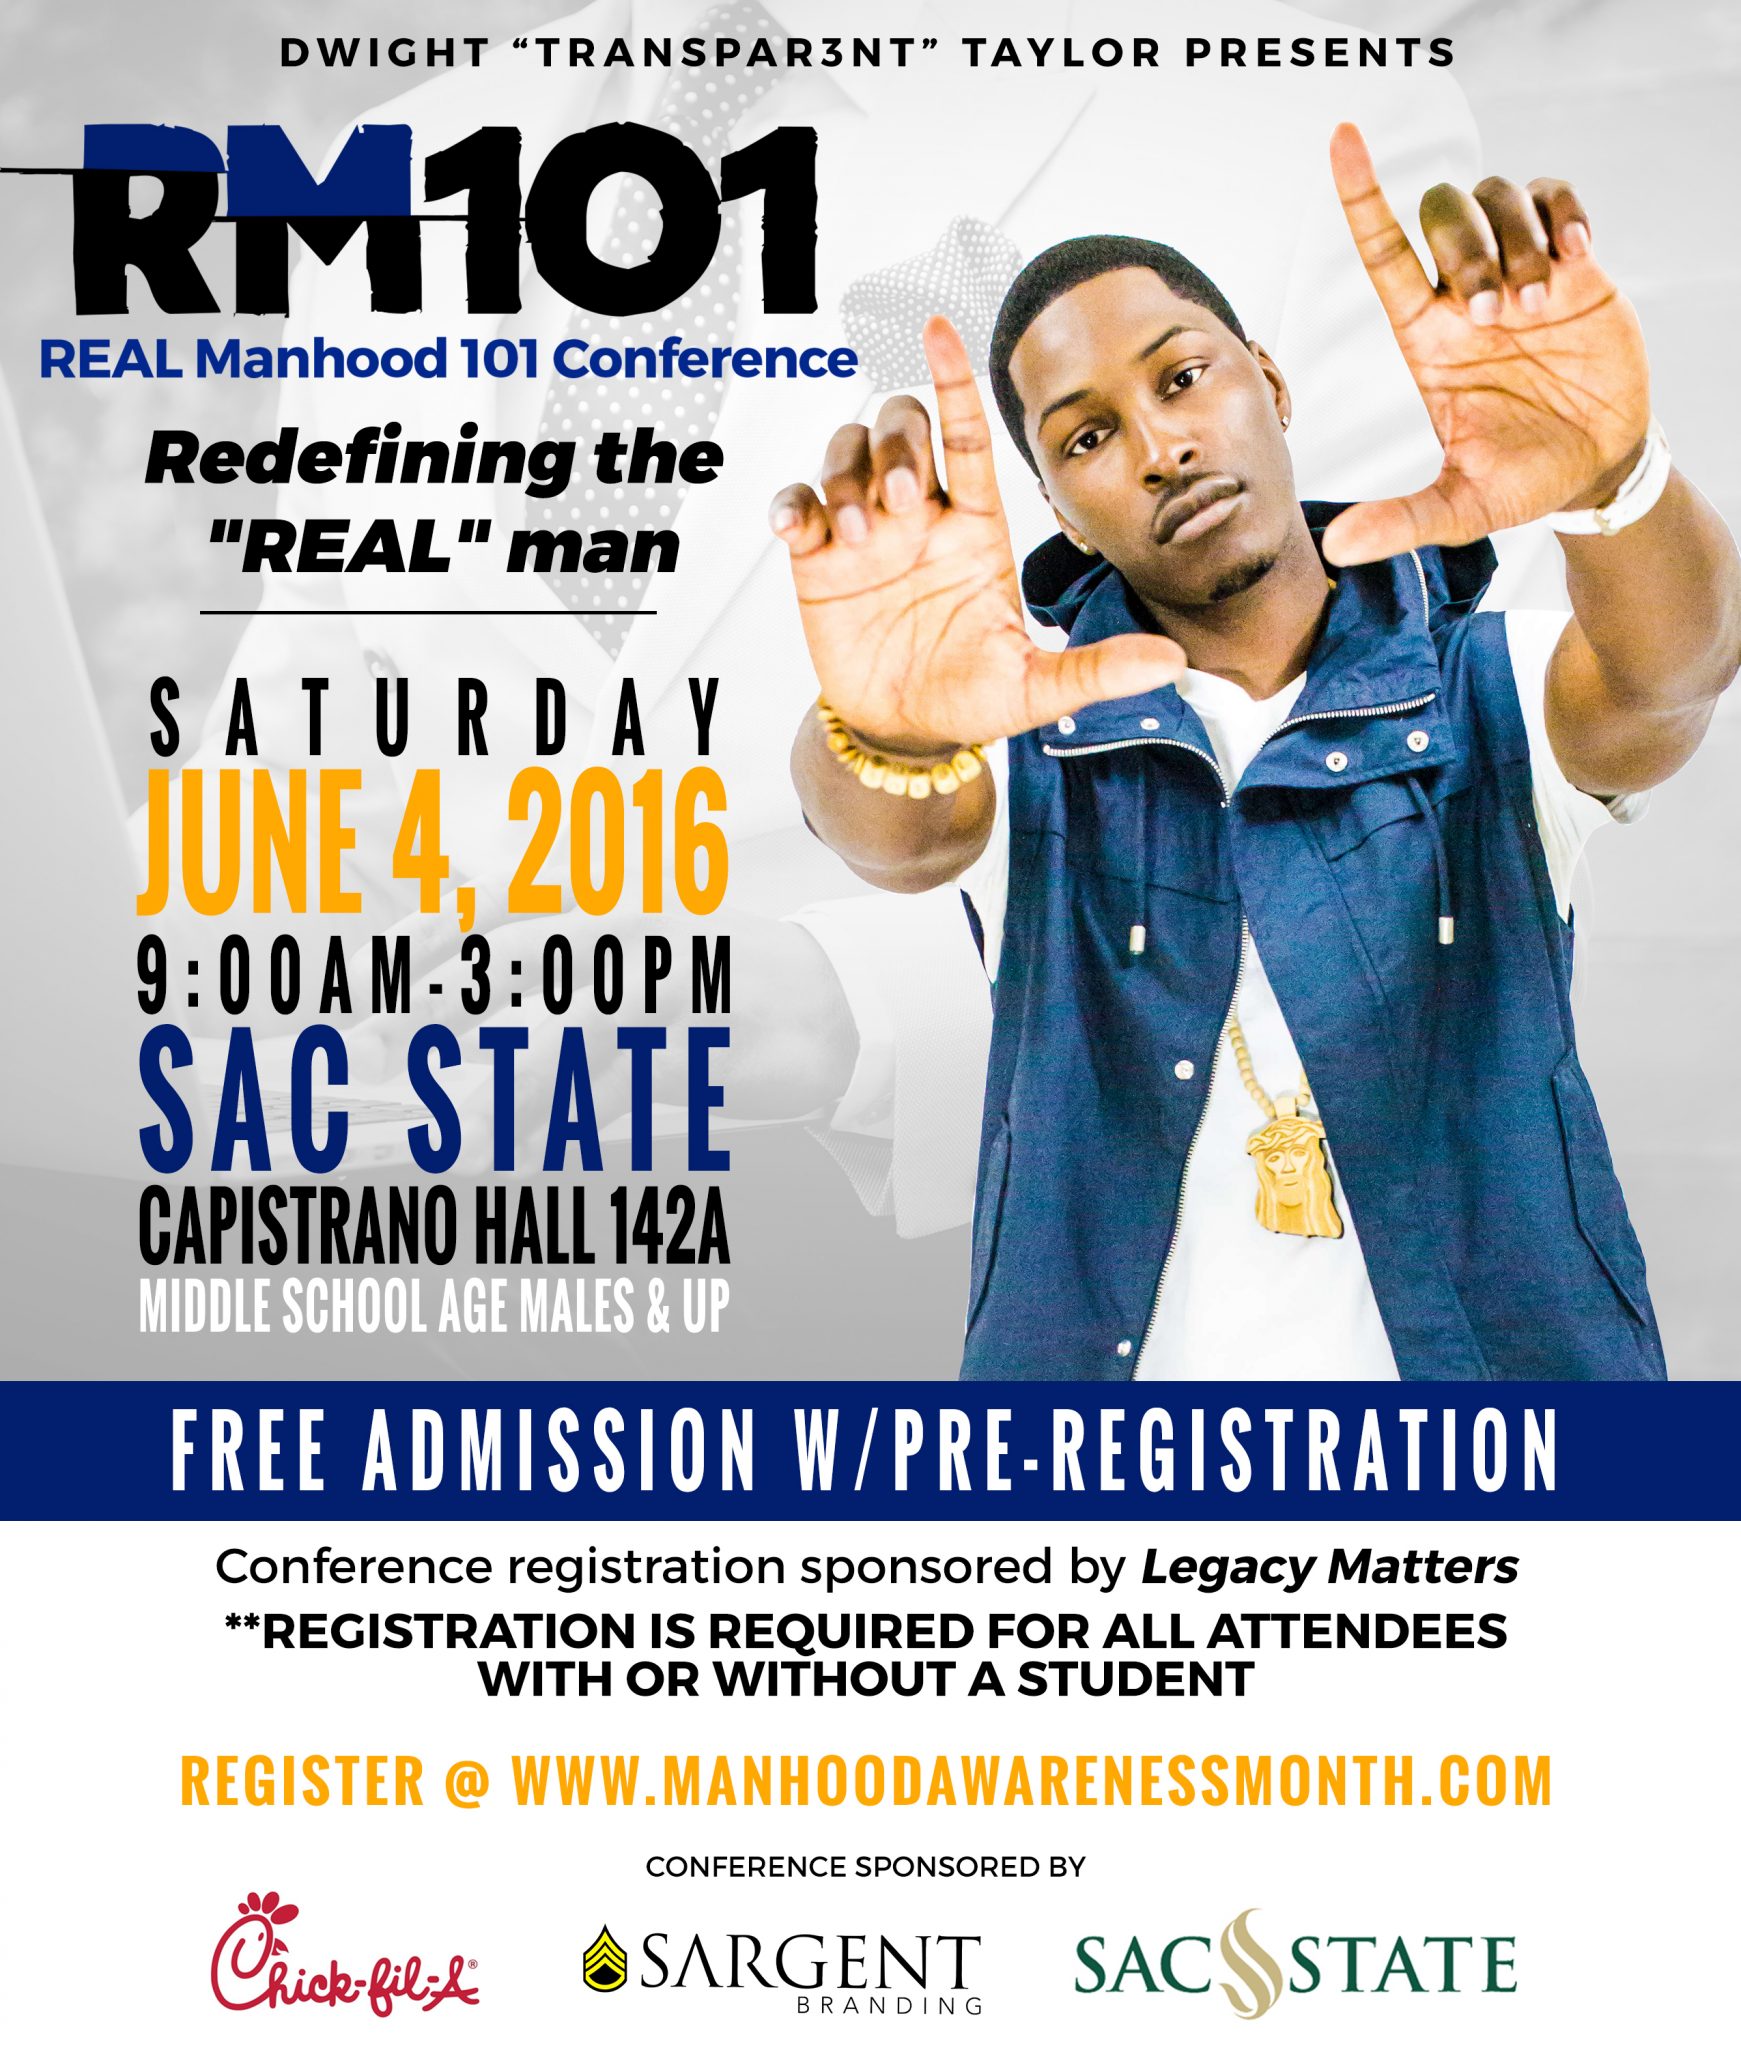 REAL Manhood 101 Conference